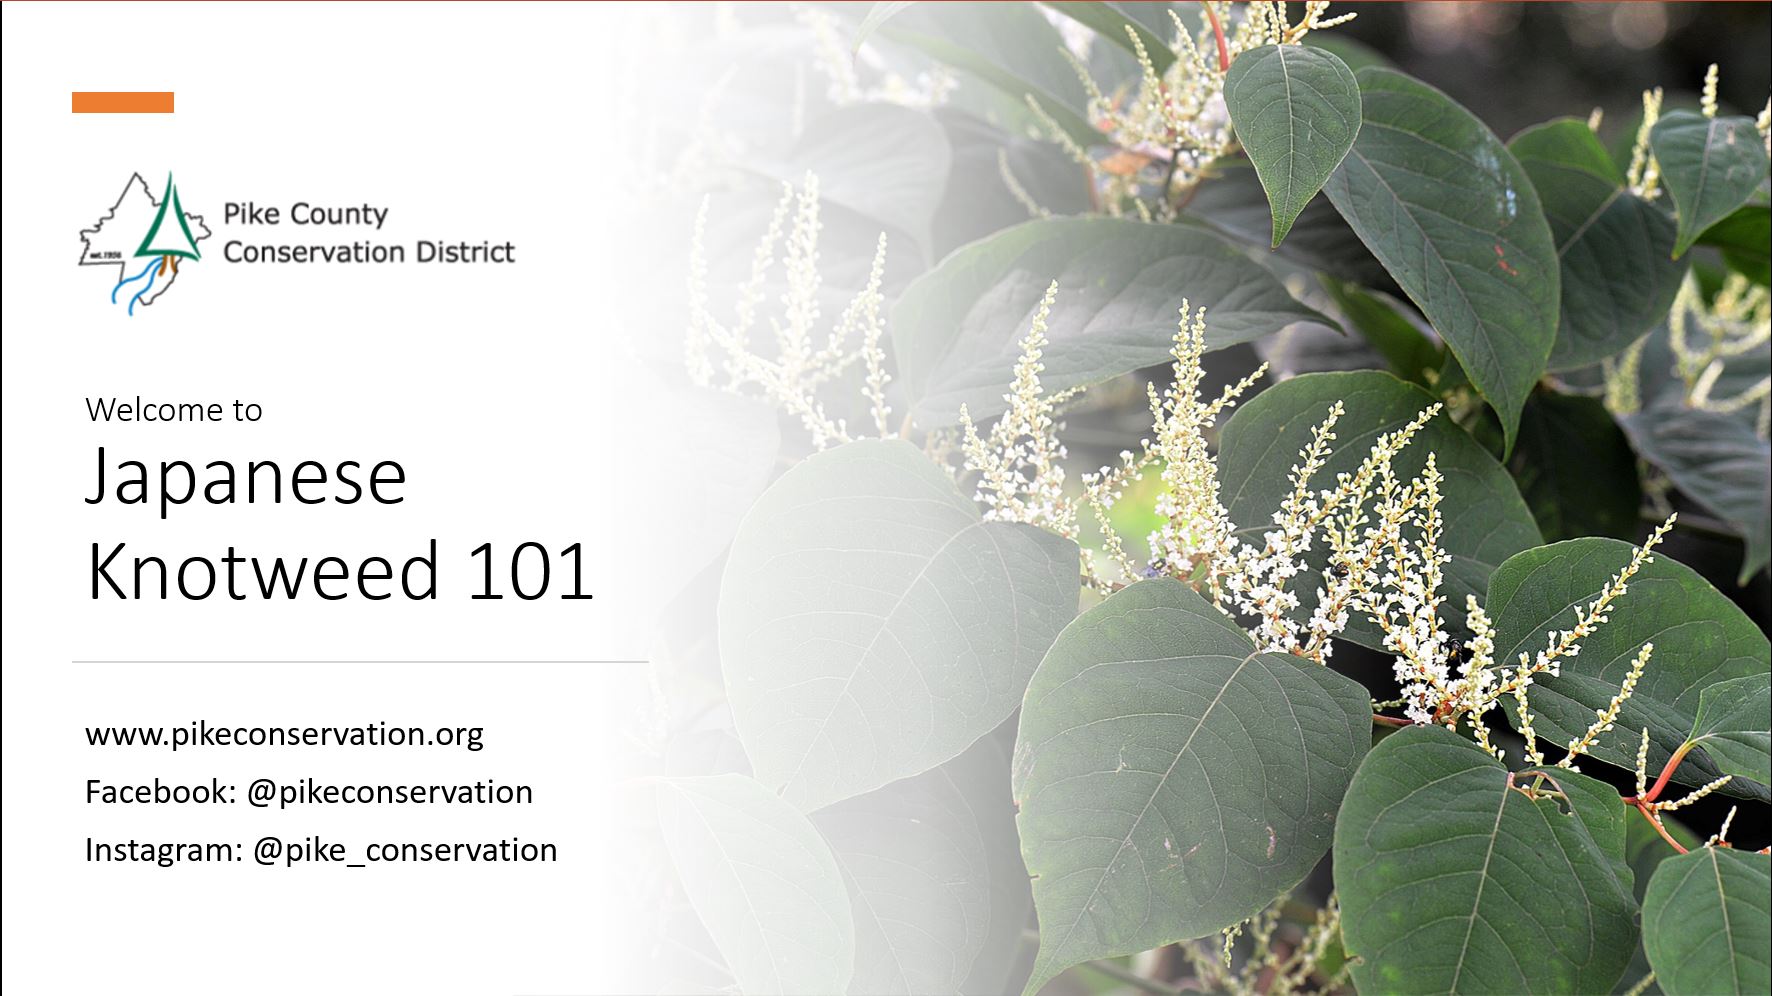 Opening slide for the Knotweed webinar, shows a picture of knotweed and the title of the program